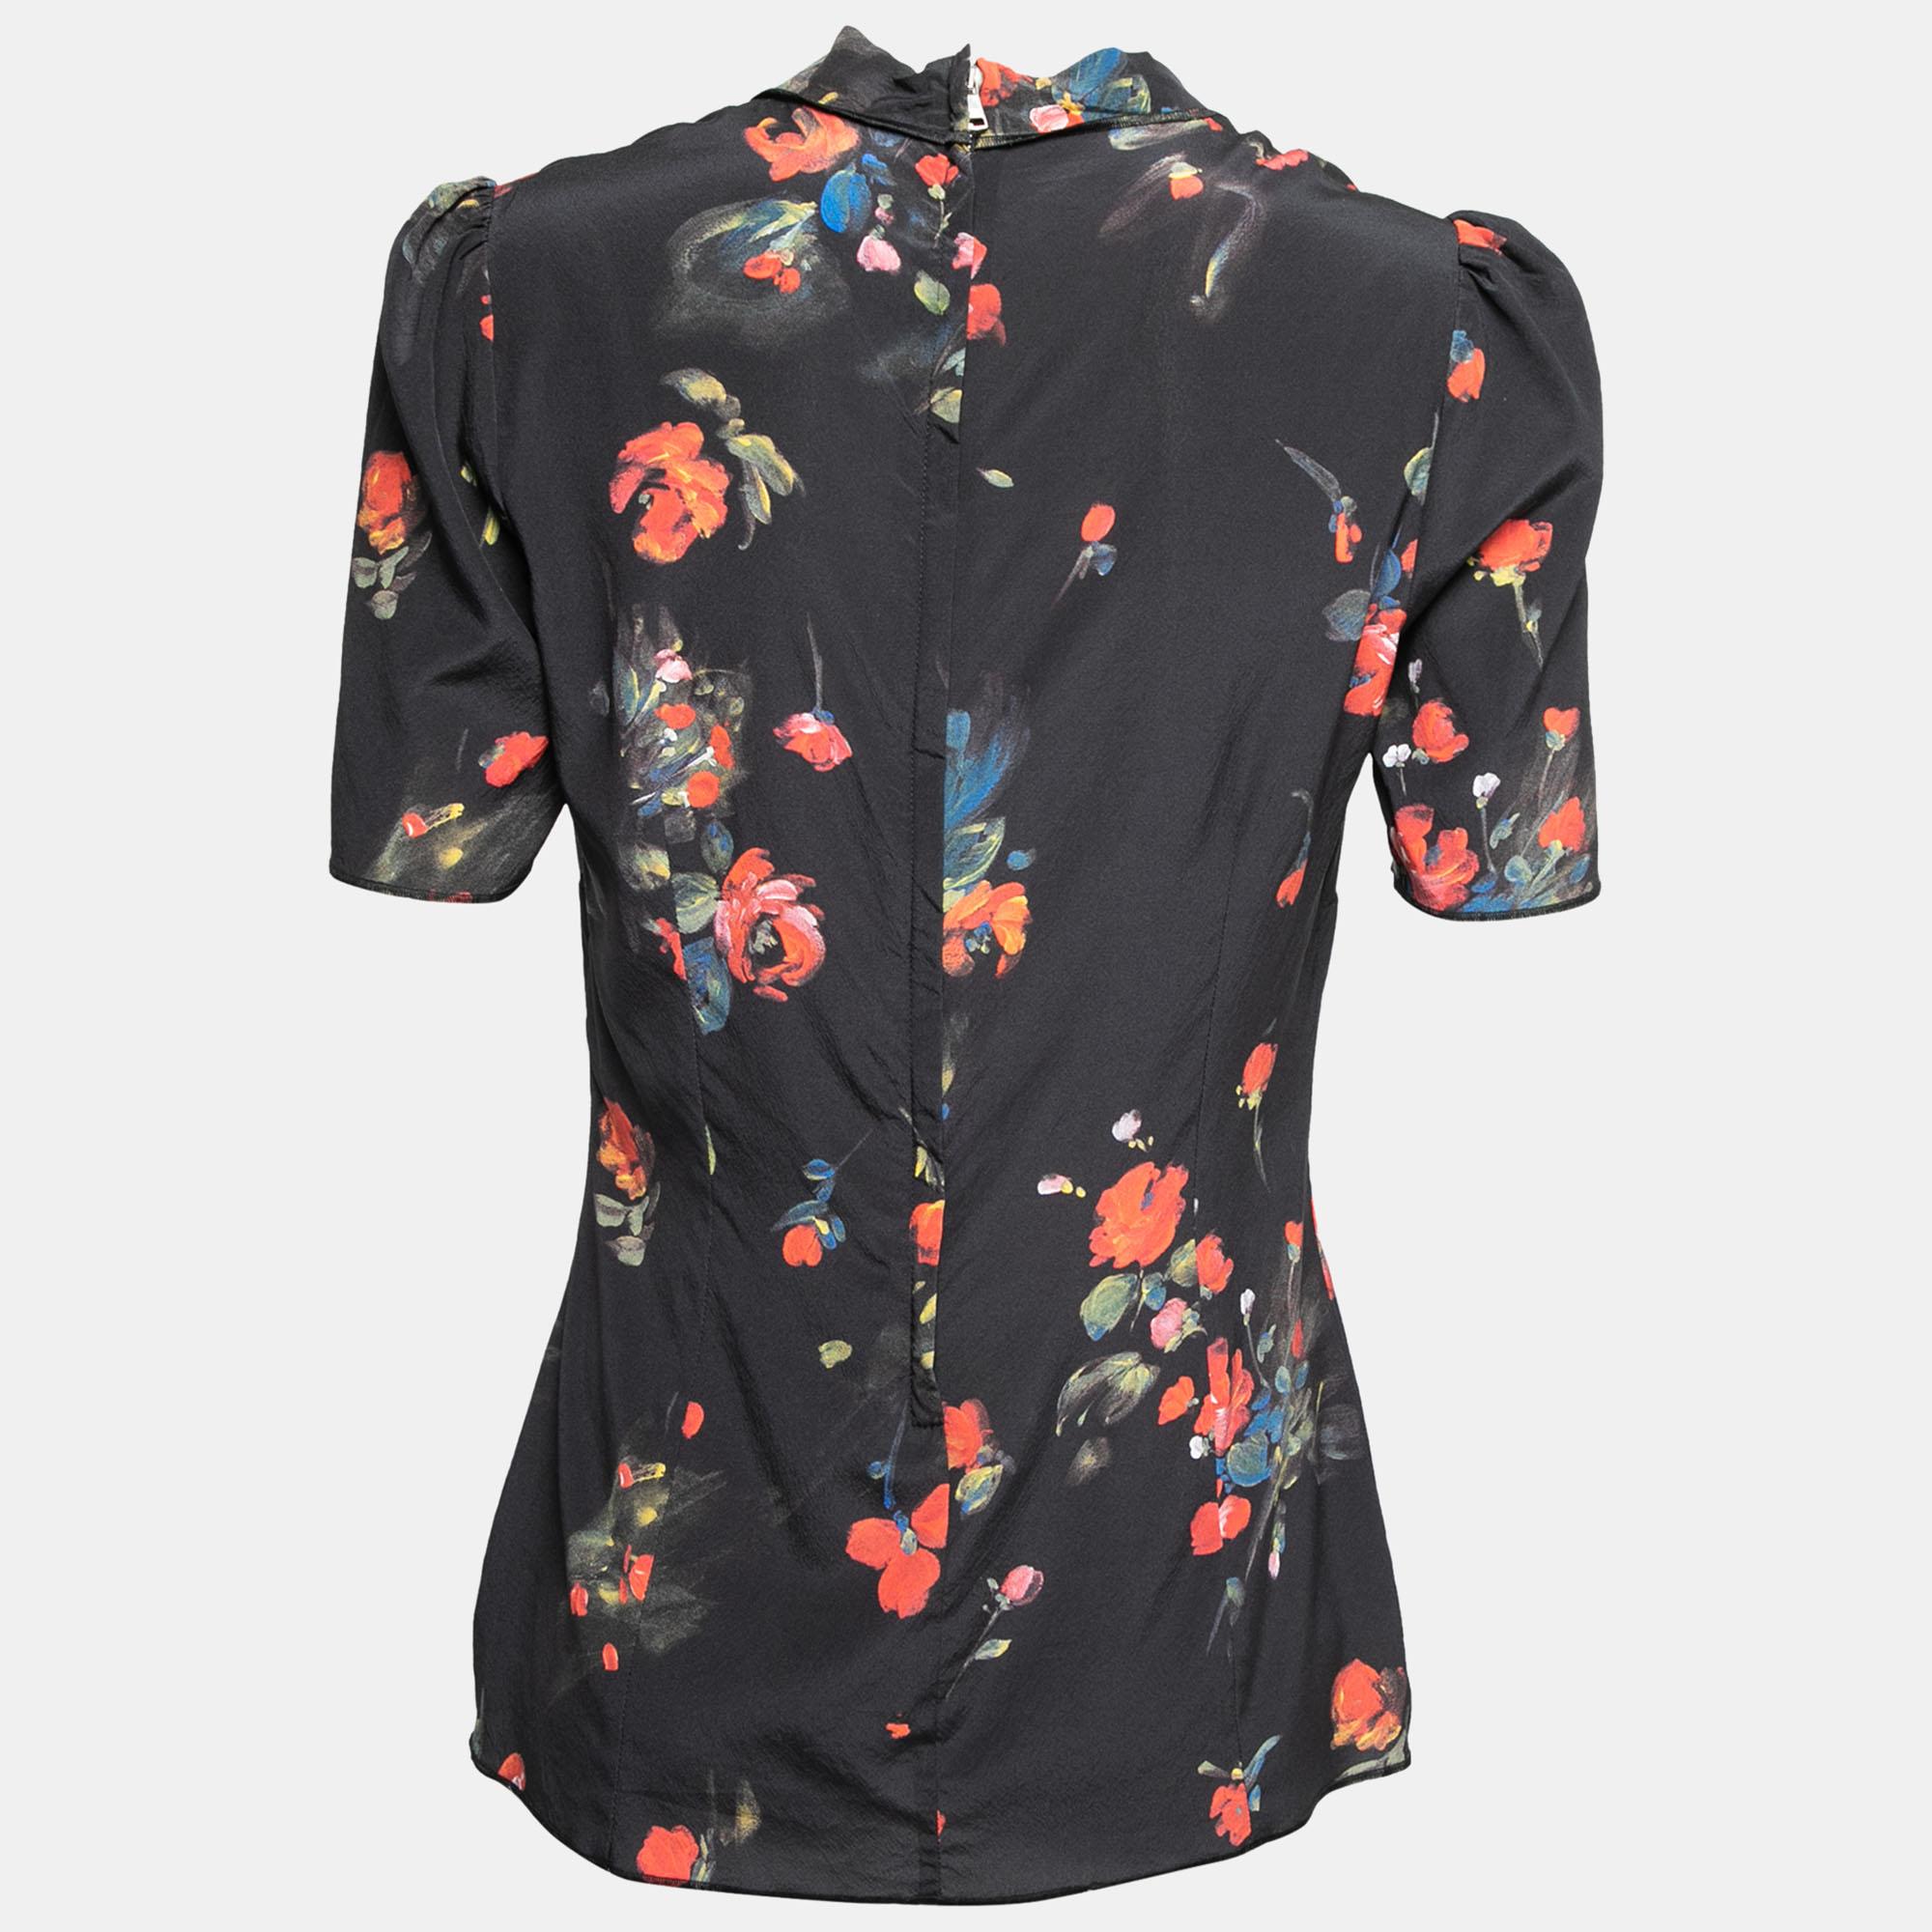 This beautiful blouse from Dolce & Gabbana is all about elegance and poise! It is stitched using black silk fabric, with multicolored floral prints augmenting its beauty. It showcases a neck-tie, short sleeves, and a zipper at the back. Match this